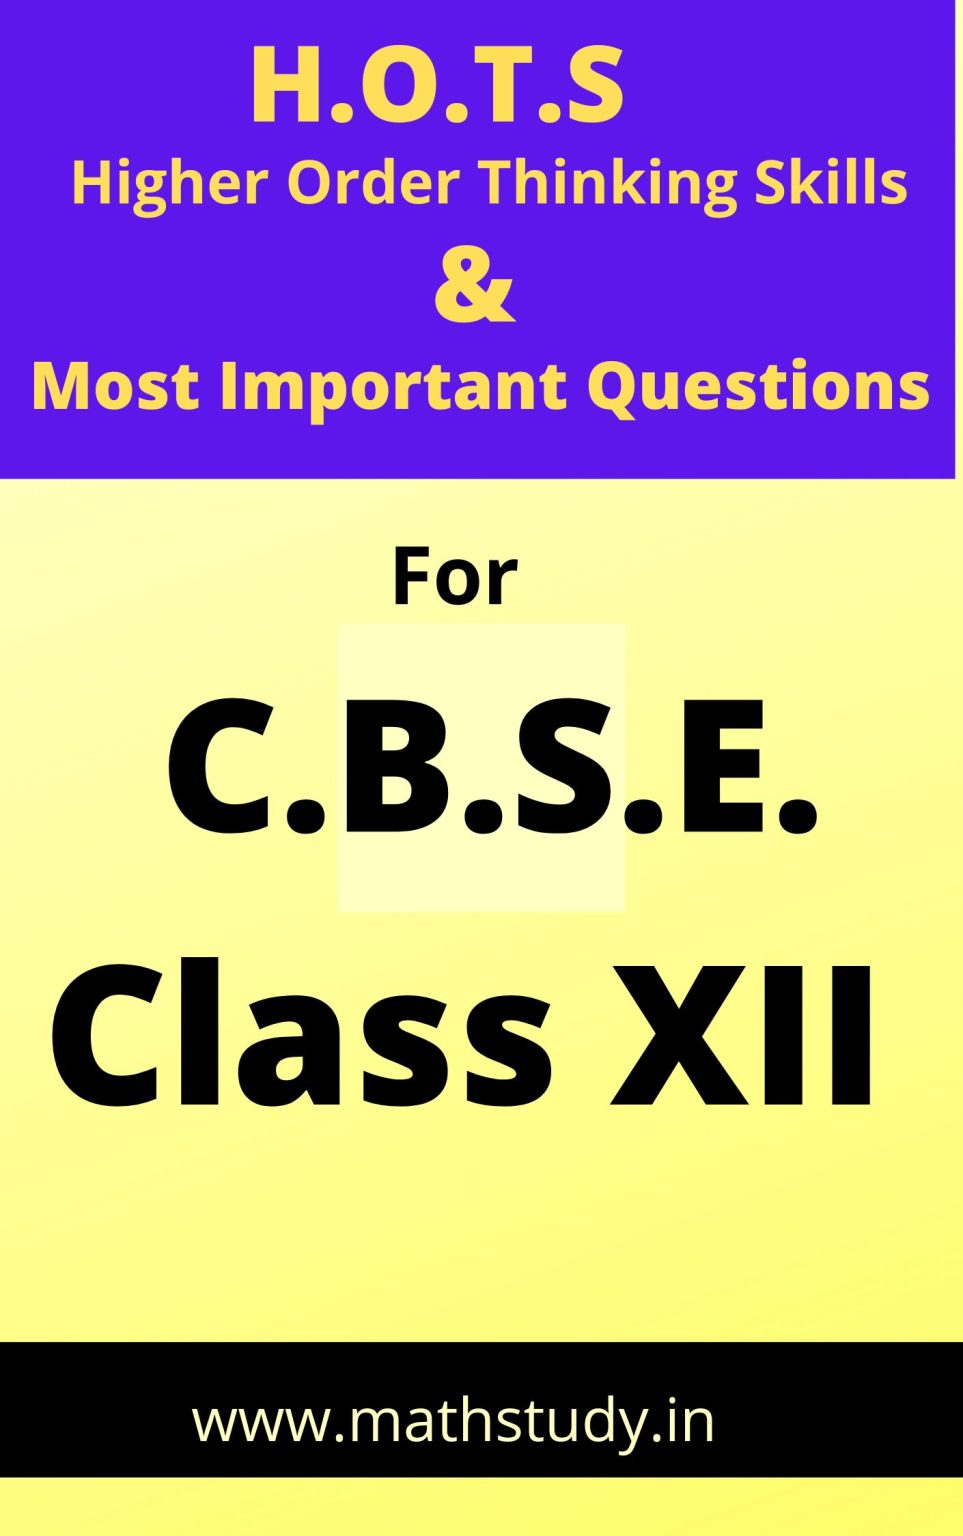 hots-and-important-questions-class-12-maths-worksheets-archives-best-e-books-mathematics